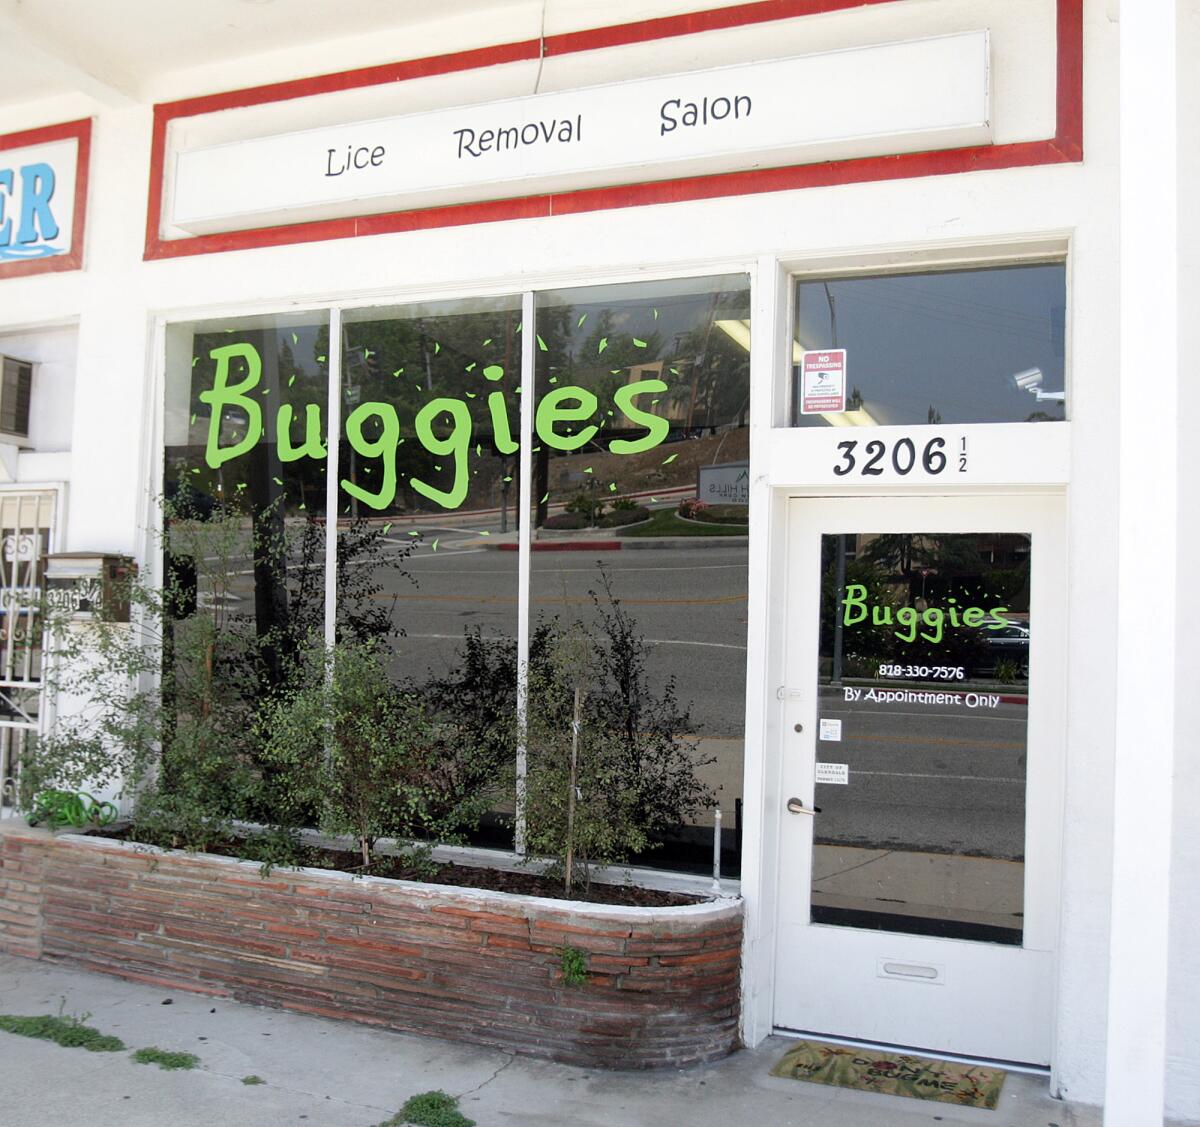 Buggies Lice Removal Salon in Montrose on Thursday, May 19, 2016.